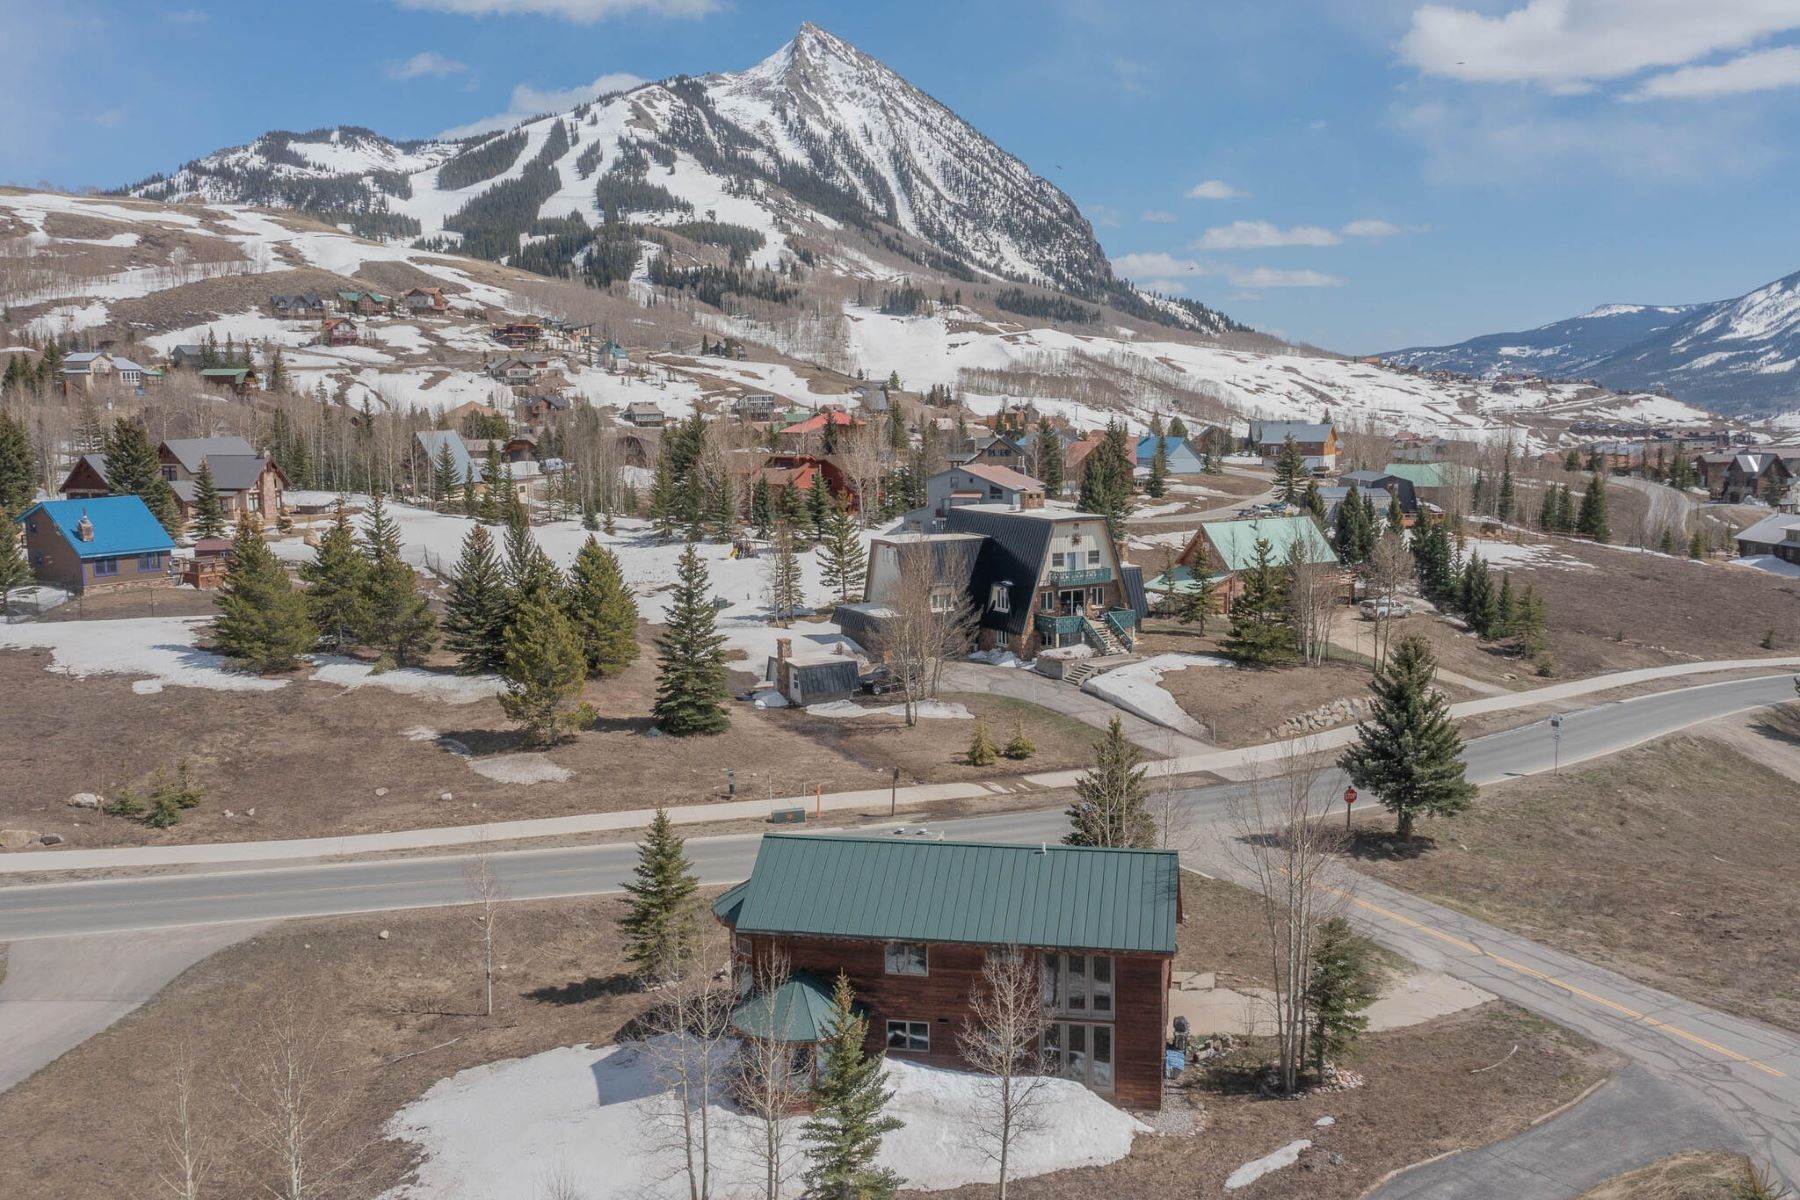 Single Family Homes for Active at 10 Arrowhead Circle, Mt. Crested Butte, CO 81225 10 Arrowhead Circle Mount Crested Butte, Colorado 81225 United States